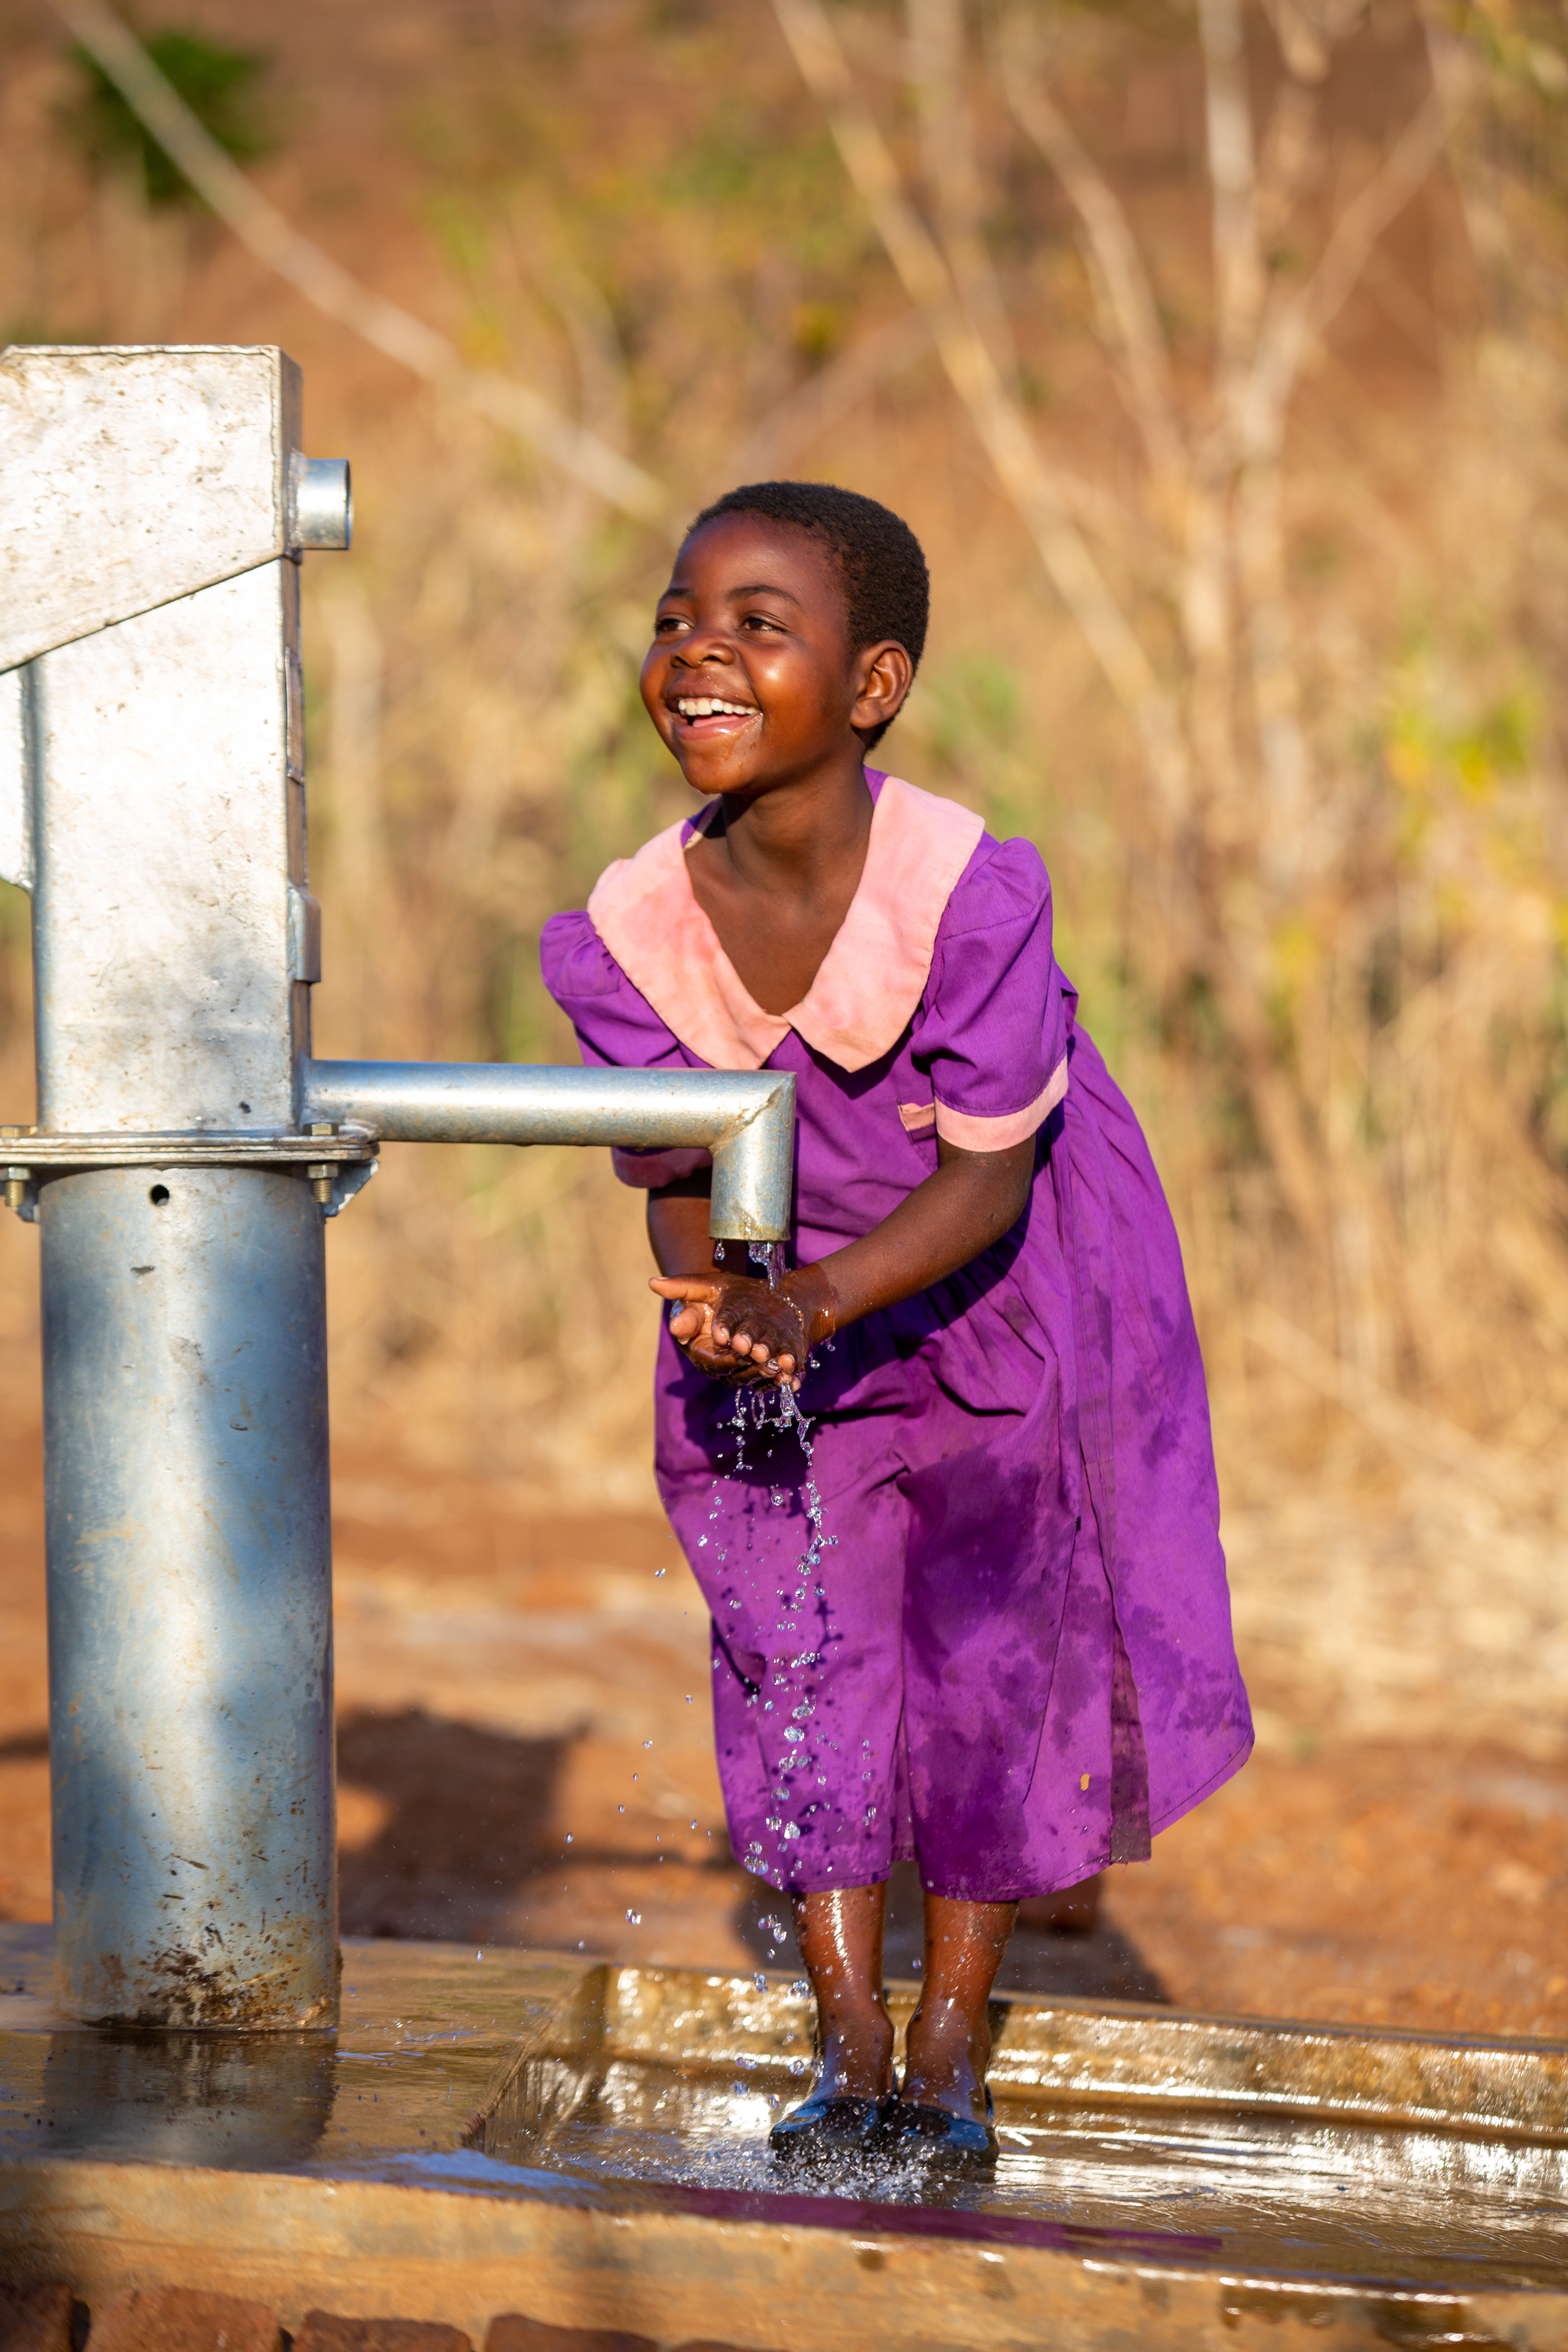 Girl in Malawi in a purple school dress washes her hands in clean water from a pump